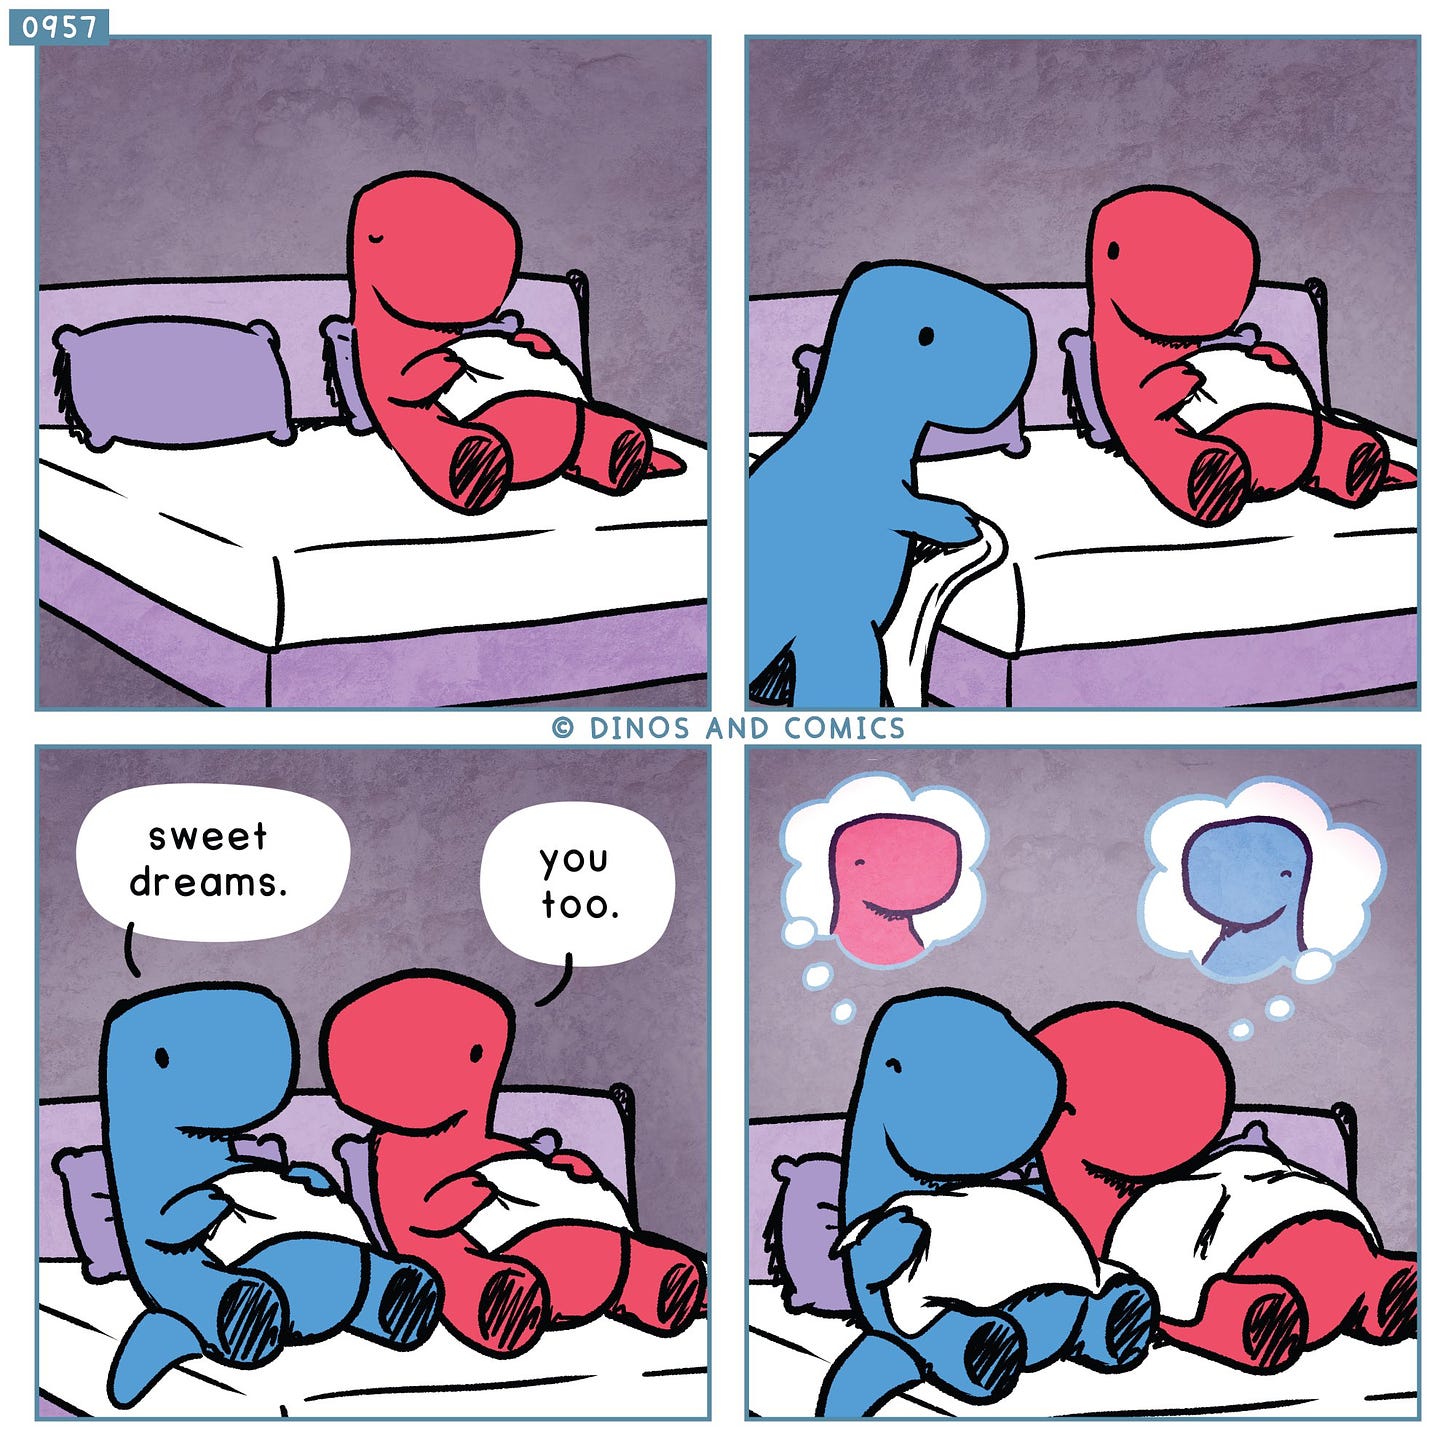 A comic.

Panel 1, Red Dino lying in bed.

Panel 2, Blue Dino getting ready to go to bed.

Panel 3.
Blue Dino to Red: "Sweet dreams."
Red Dino replies, "You too."

Panel 4.
Red and Blue Dino sleeping, both dreaming of each other.